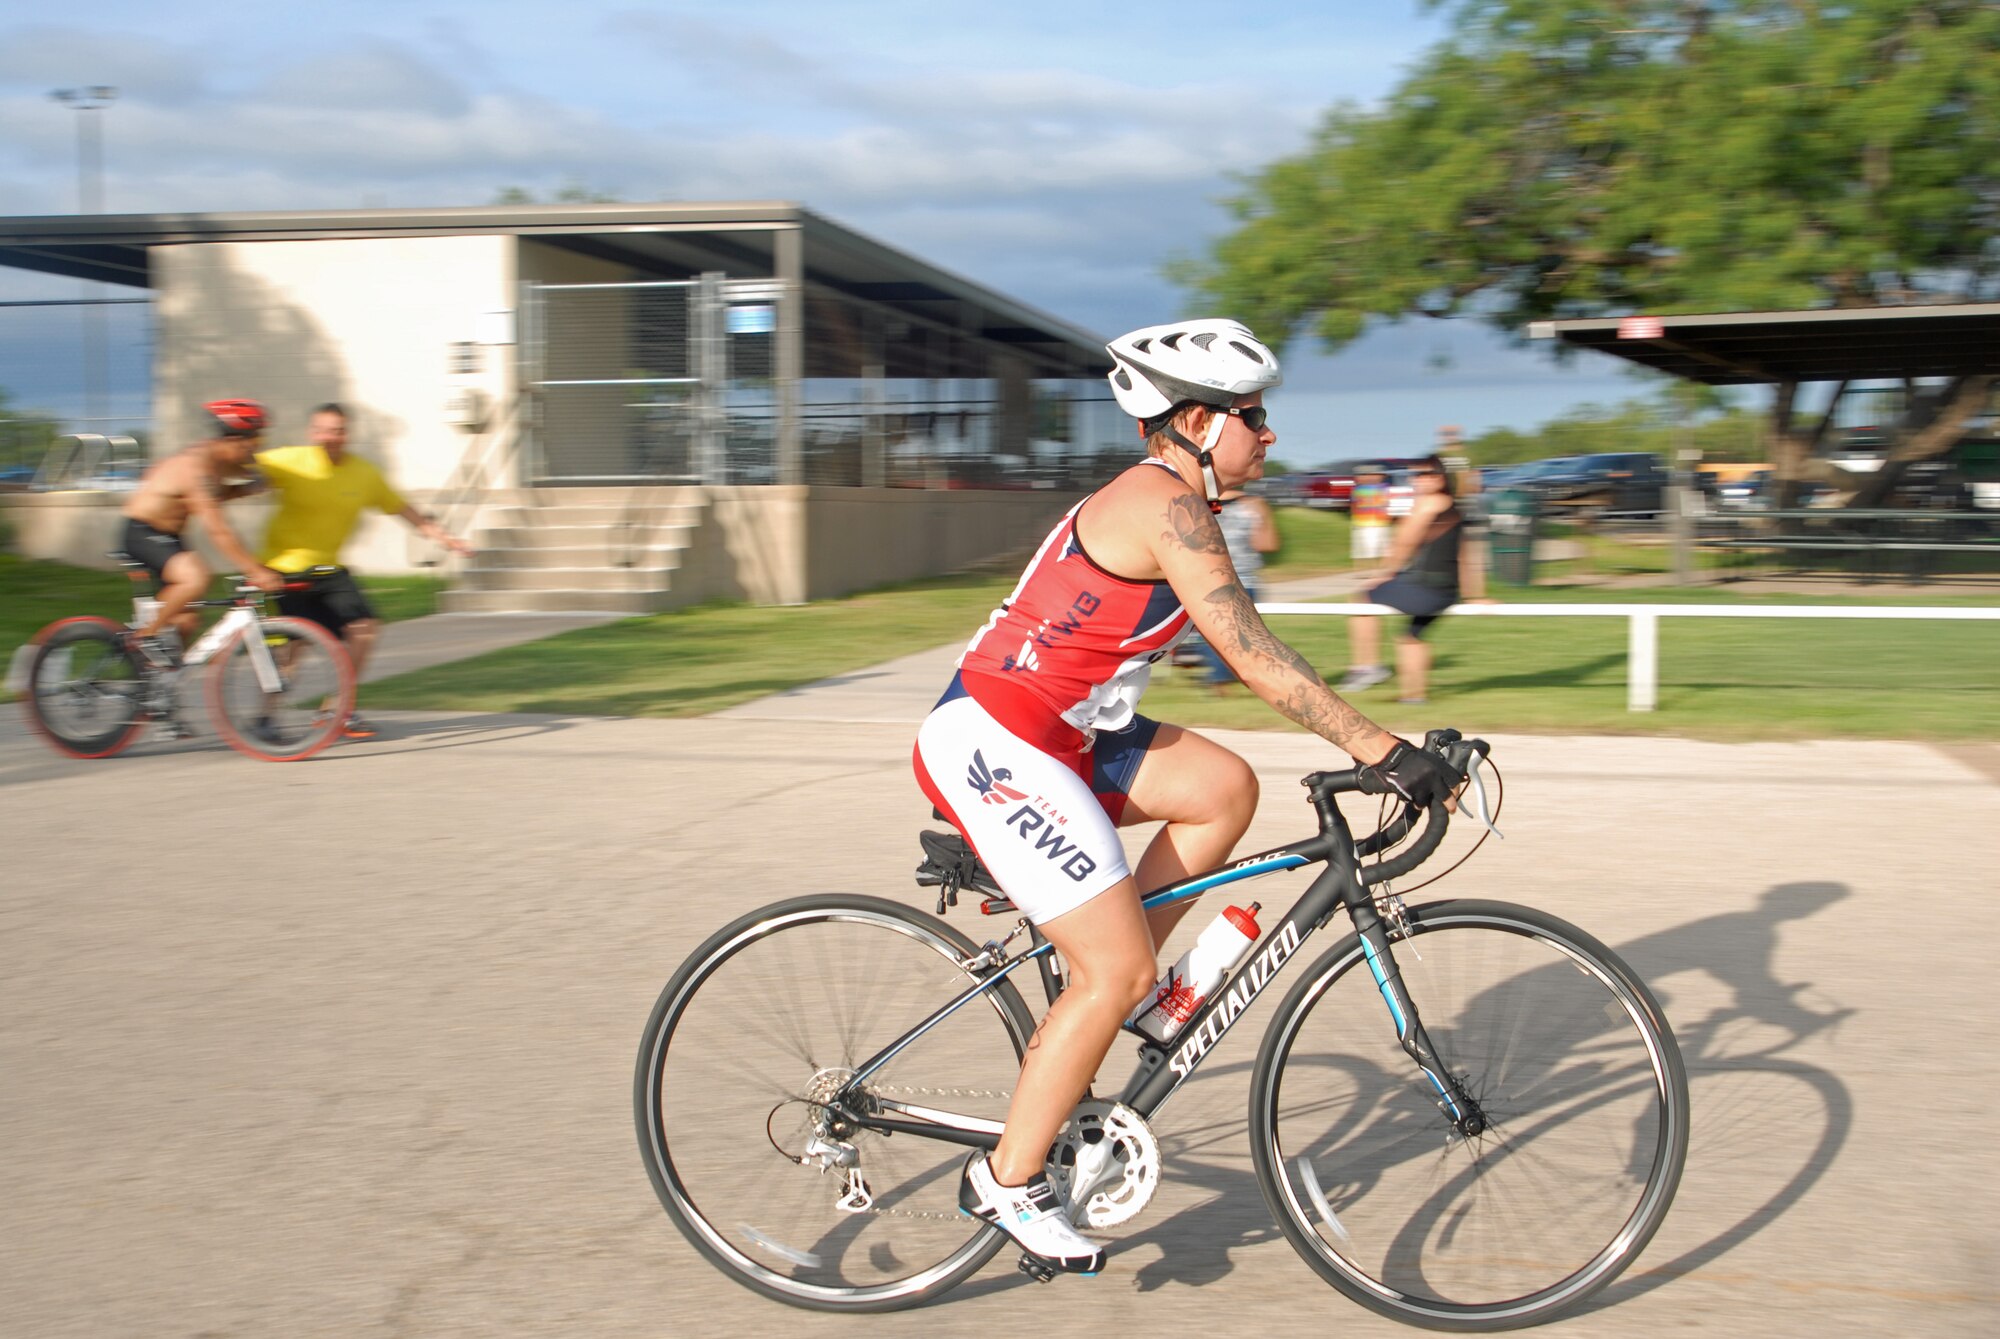 SAN ANGELO, Texas – Army 1st Sgt. Annett Reed, 344th Military intelligence Battalion Charlie Company first sergeant, starts the bicycle ride leg of the 2013 Annual Triathlon at the Goodfellow Recreation Camp July 27. Cyclists start at the Rec Camp and ride 10-kilometers south to the South Concho River Bridge then proceed 10-kilometers back to the Rec Camp. (U.S. Air Force photo/ Airman 1st Class Breonna Veal)